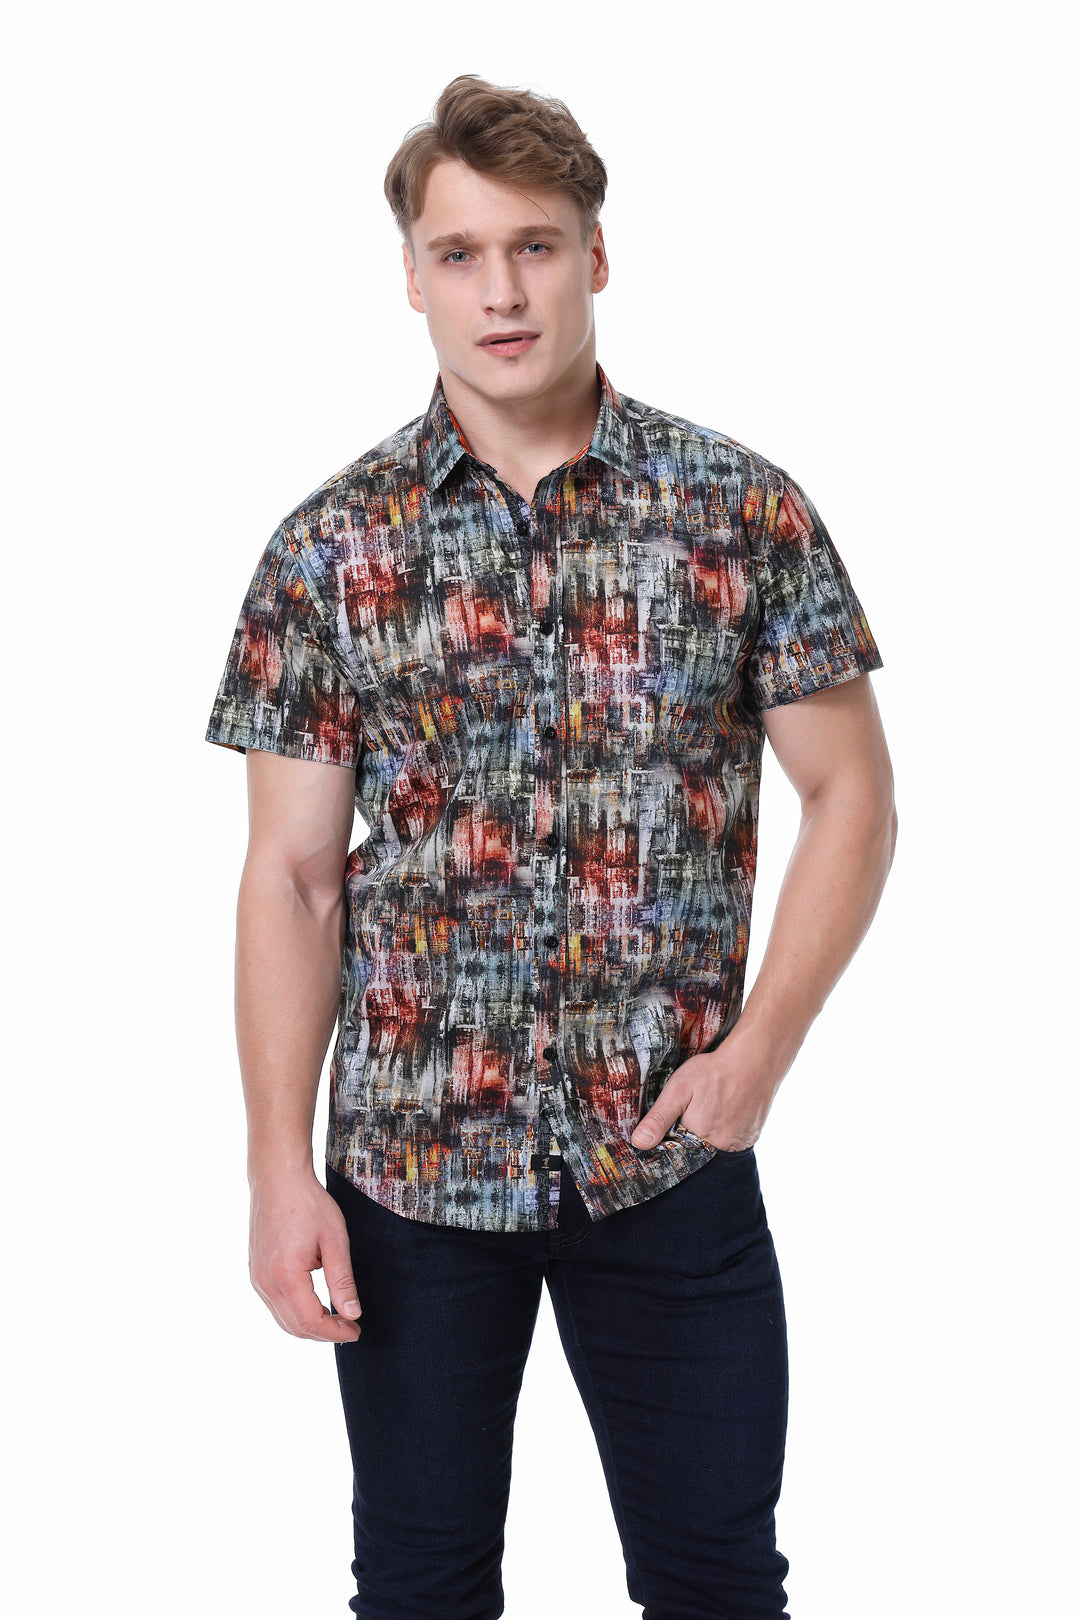 1 Like No other Vidre Short Sleeve Casual Shirt